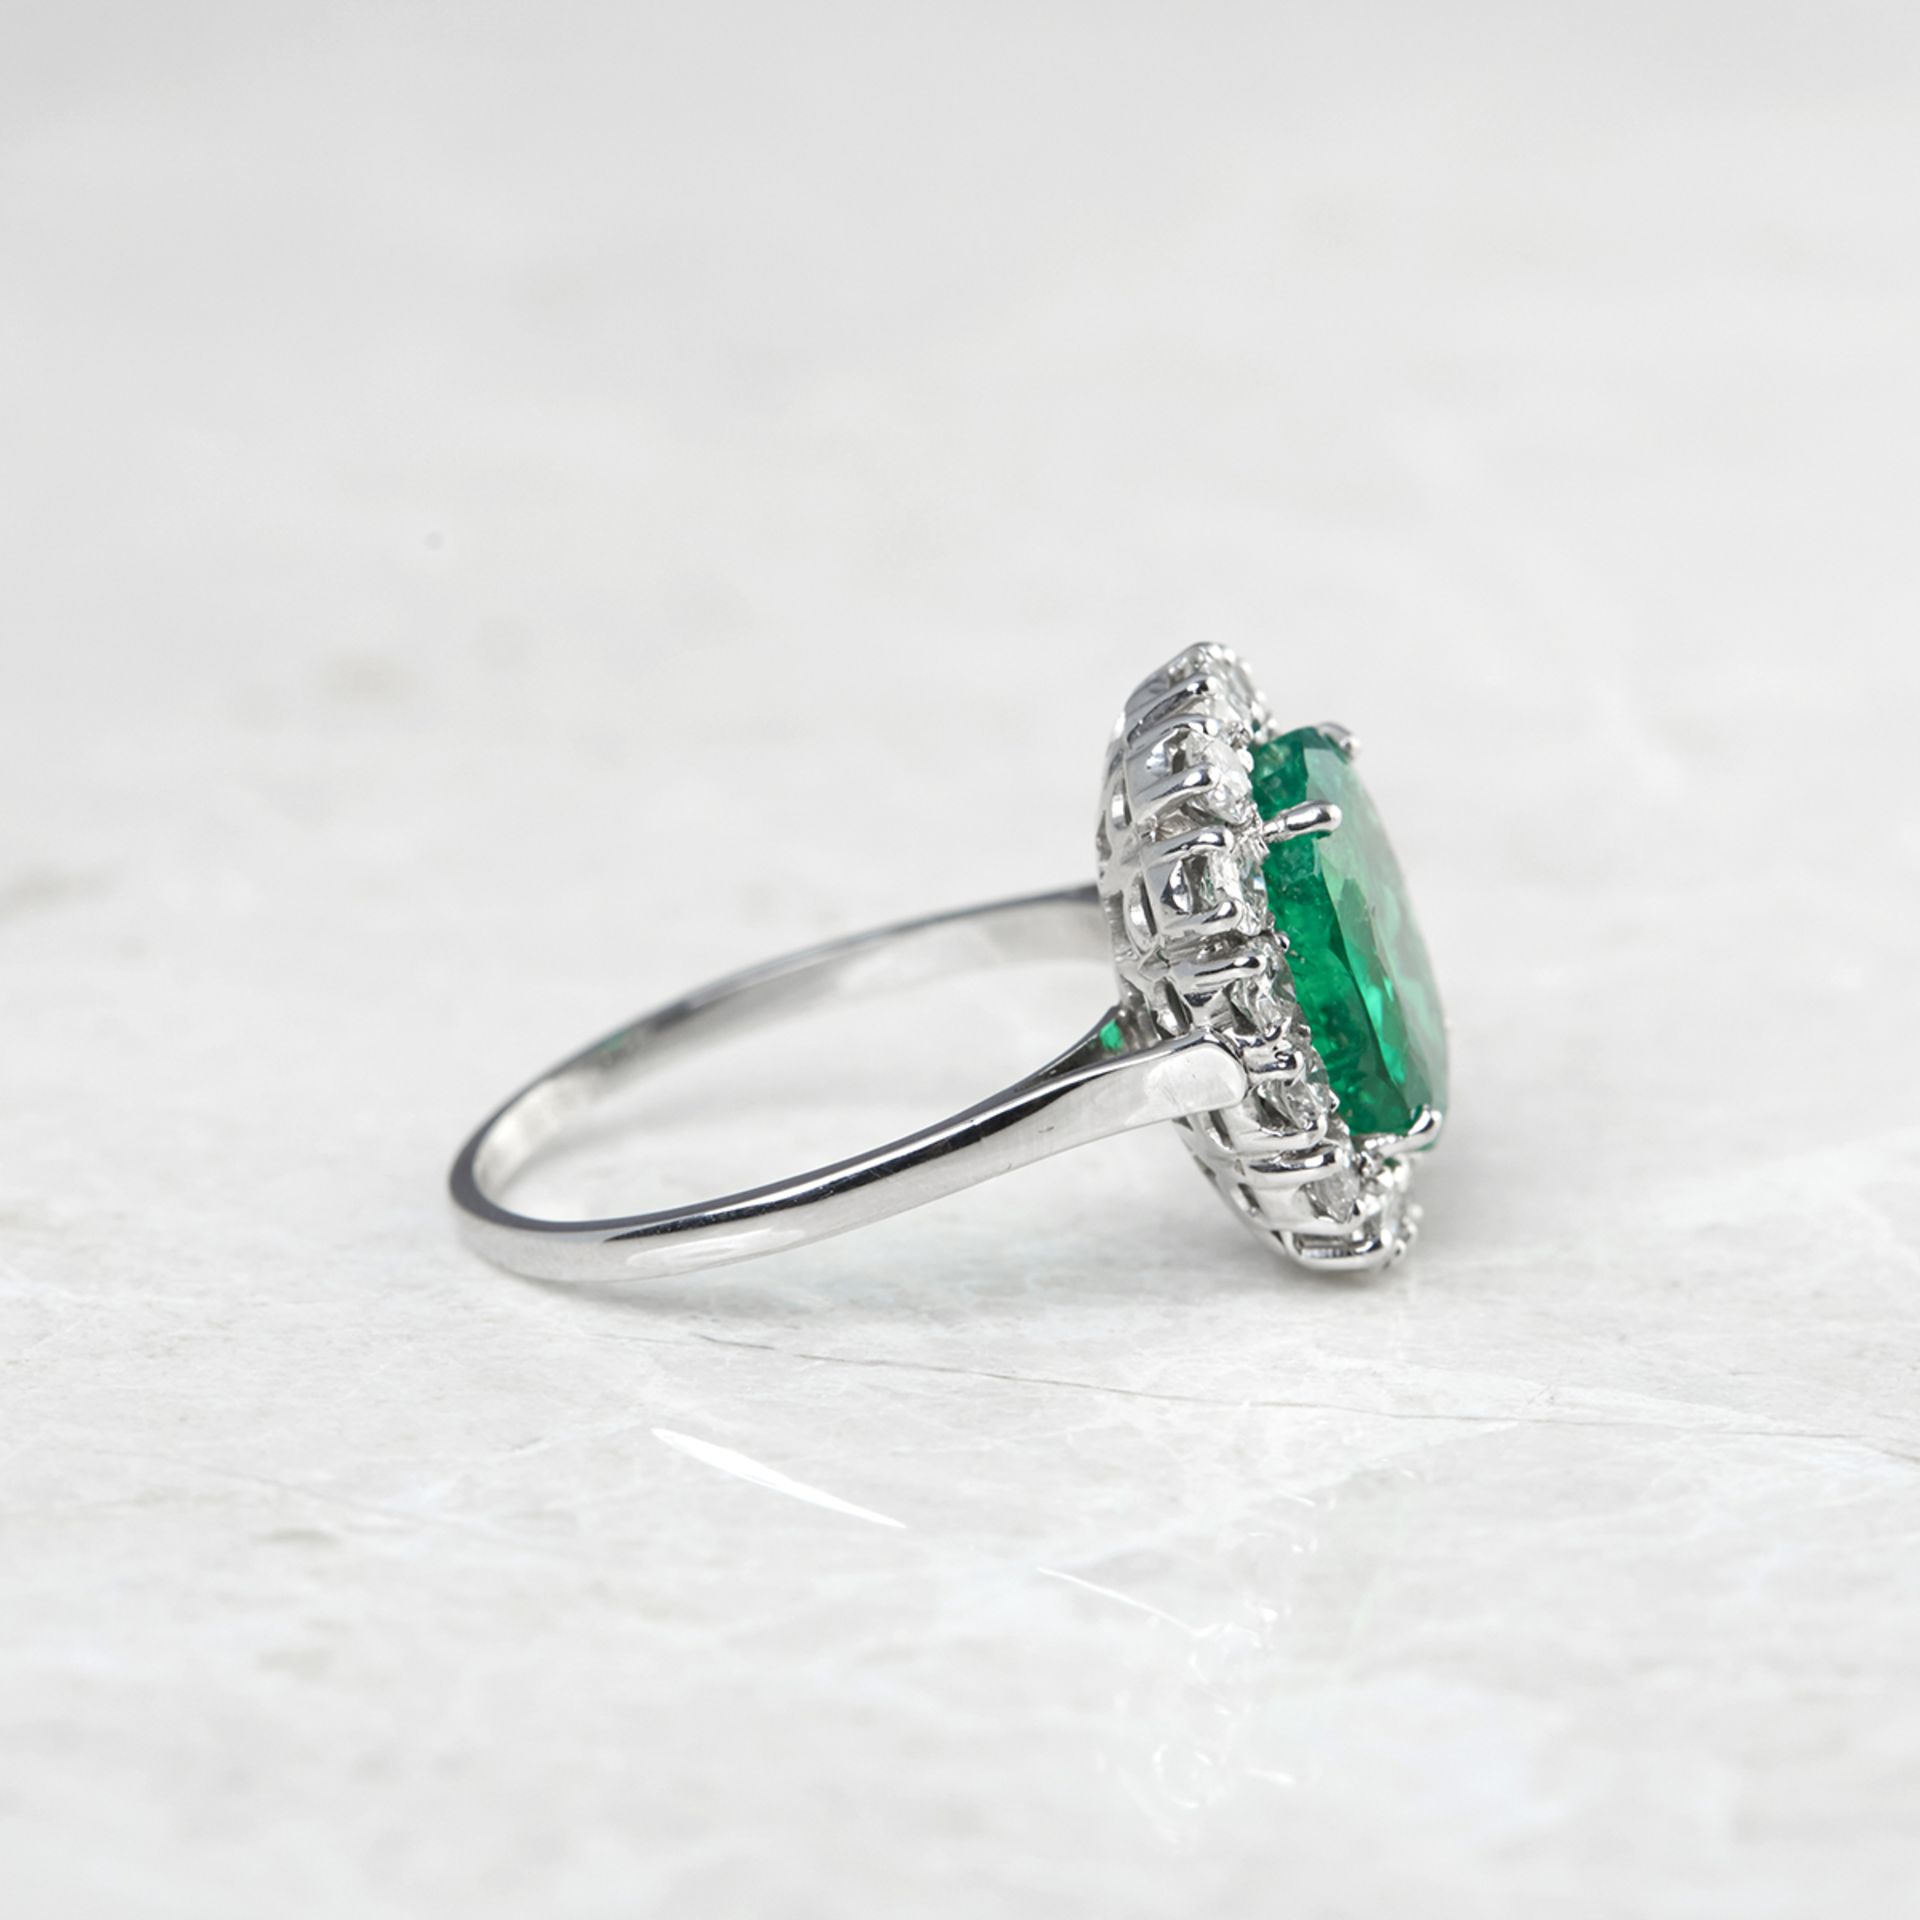 18k White Gold 4.60ct Colombian Emerald & 2.00ct Diamond Ring - Image 4 of 6